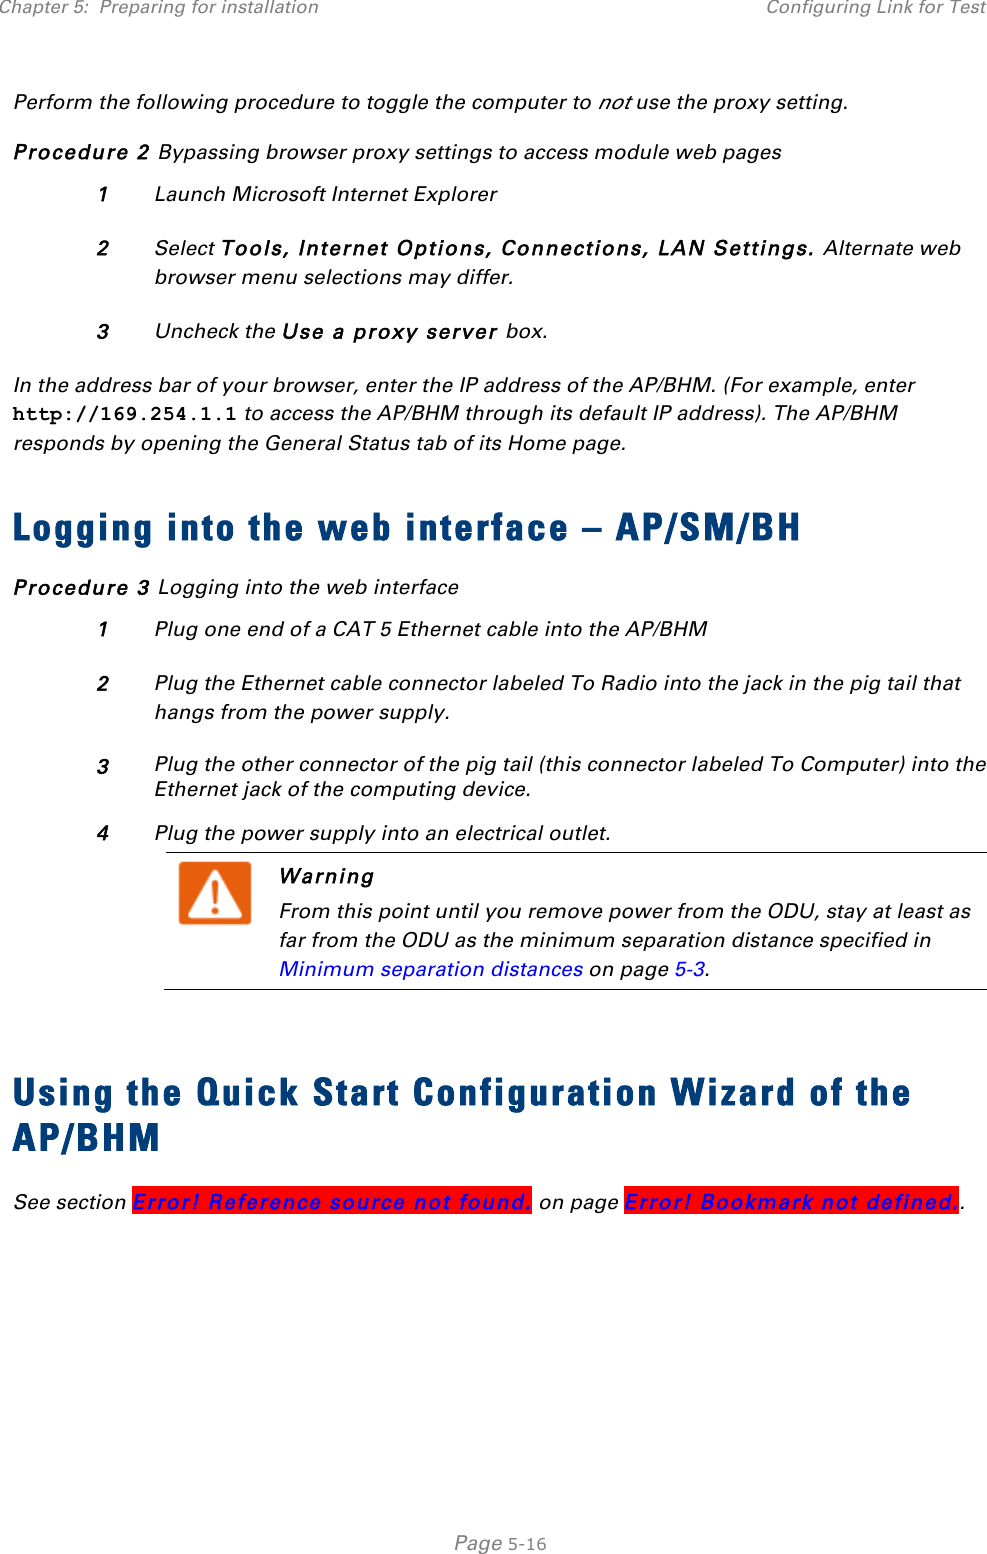 Chapter 5:  Preparing for installation Configuring Link for Test   Page 5-16 Perform the following procedure to toggle the computer to not use the proxy setting. Procedure 2 Bypassing browser proxy settings to access module web pages 1 Launch Microsoft Internet Explorer 2 Select Tools, Internet Options, Connections, LAN Settings. Alternate web browser menu selections may differ. 3 Uncheck the Use a proxy server box. In the address bar of your browser, enter the IP address of the AP/BHM. (For example, enter http://169.254.1.1 to access the AP/BHM through its default IP address). The AP/BHM responds by opening the General Status tab of its Home page.  Logging into the web interface – AP/SM/BH Procedure 3 Logging into the web interface 1 Plug one end of a CAT 5 Ethernet cable into the AP/BHM 2 Plug the Ethernet cable connector labeled To Radio into the jack in the pig tail that hangs from the power supply. 3 Plug the other connector of the pig tail (this connector labeled To Computer) into the Ethernet jack of the computing device. 4 Plug the power supply into an electrical outlet.  Warning From this point until you remove power from the ODU, stay at least as far from the ODU as the minimum separation distance specified in Minimum separation distances on page 5-3.   Using the Quick Start Configuration Wizard of the AP/BHM See section Error! Reference source not found. on page Error! Bookmark not defined..       